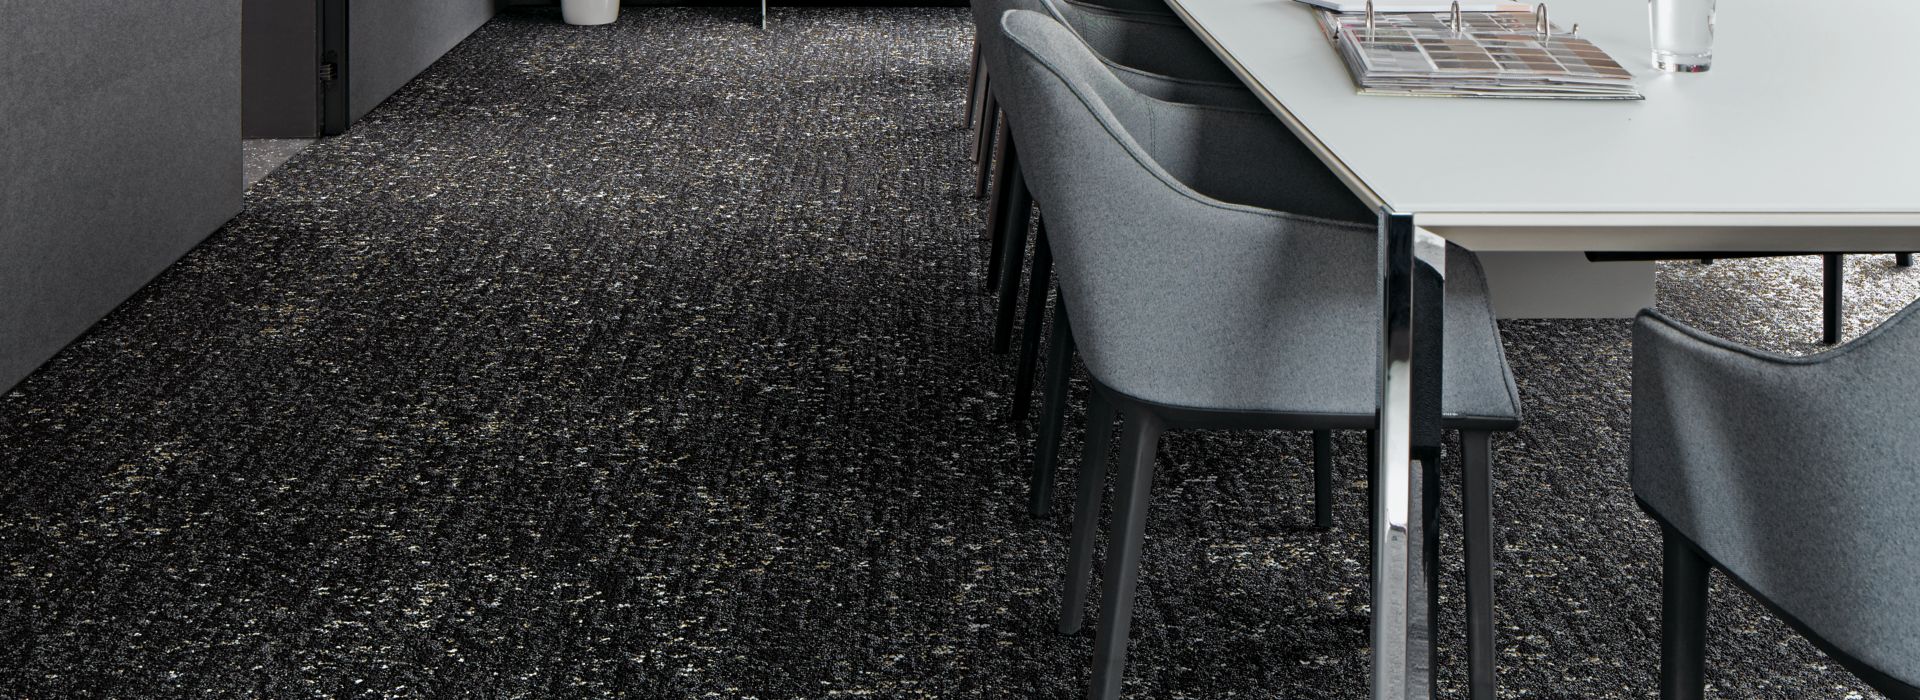 Interface Step in Time and Walk the Aisle carpet tile in meeting area with table and chairs